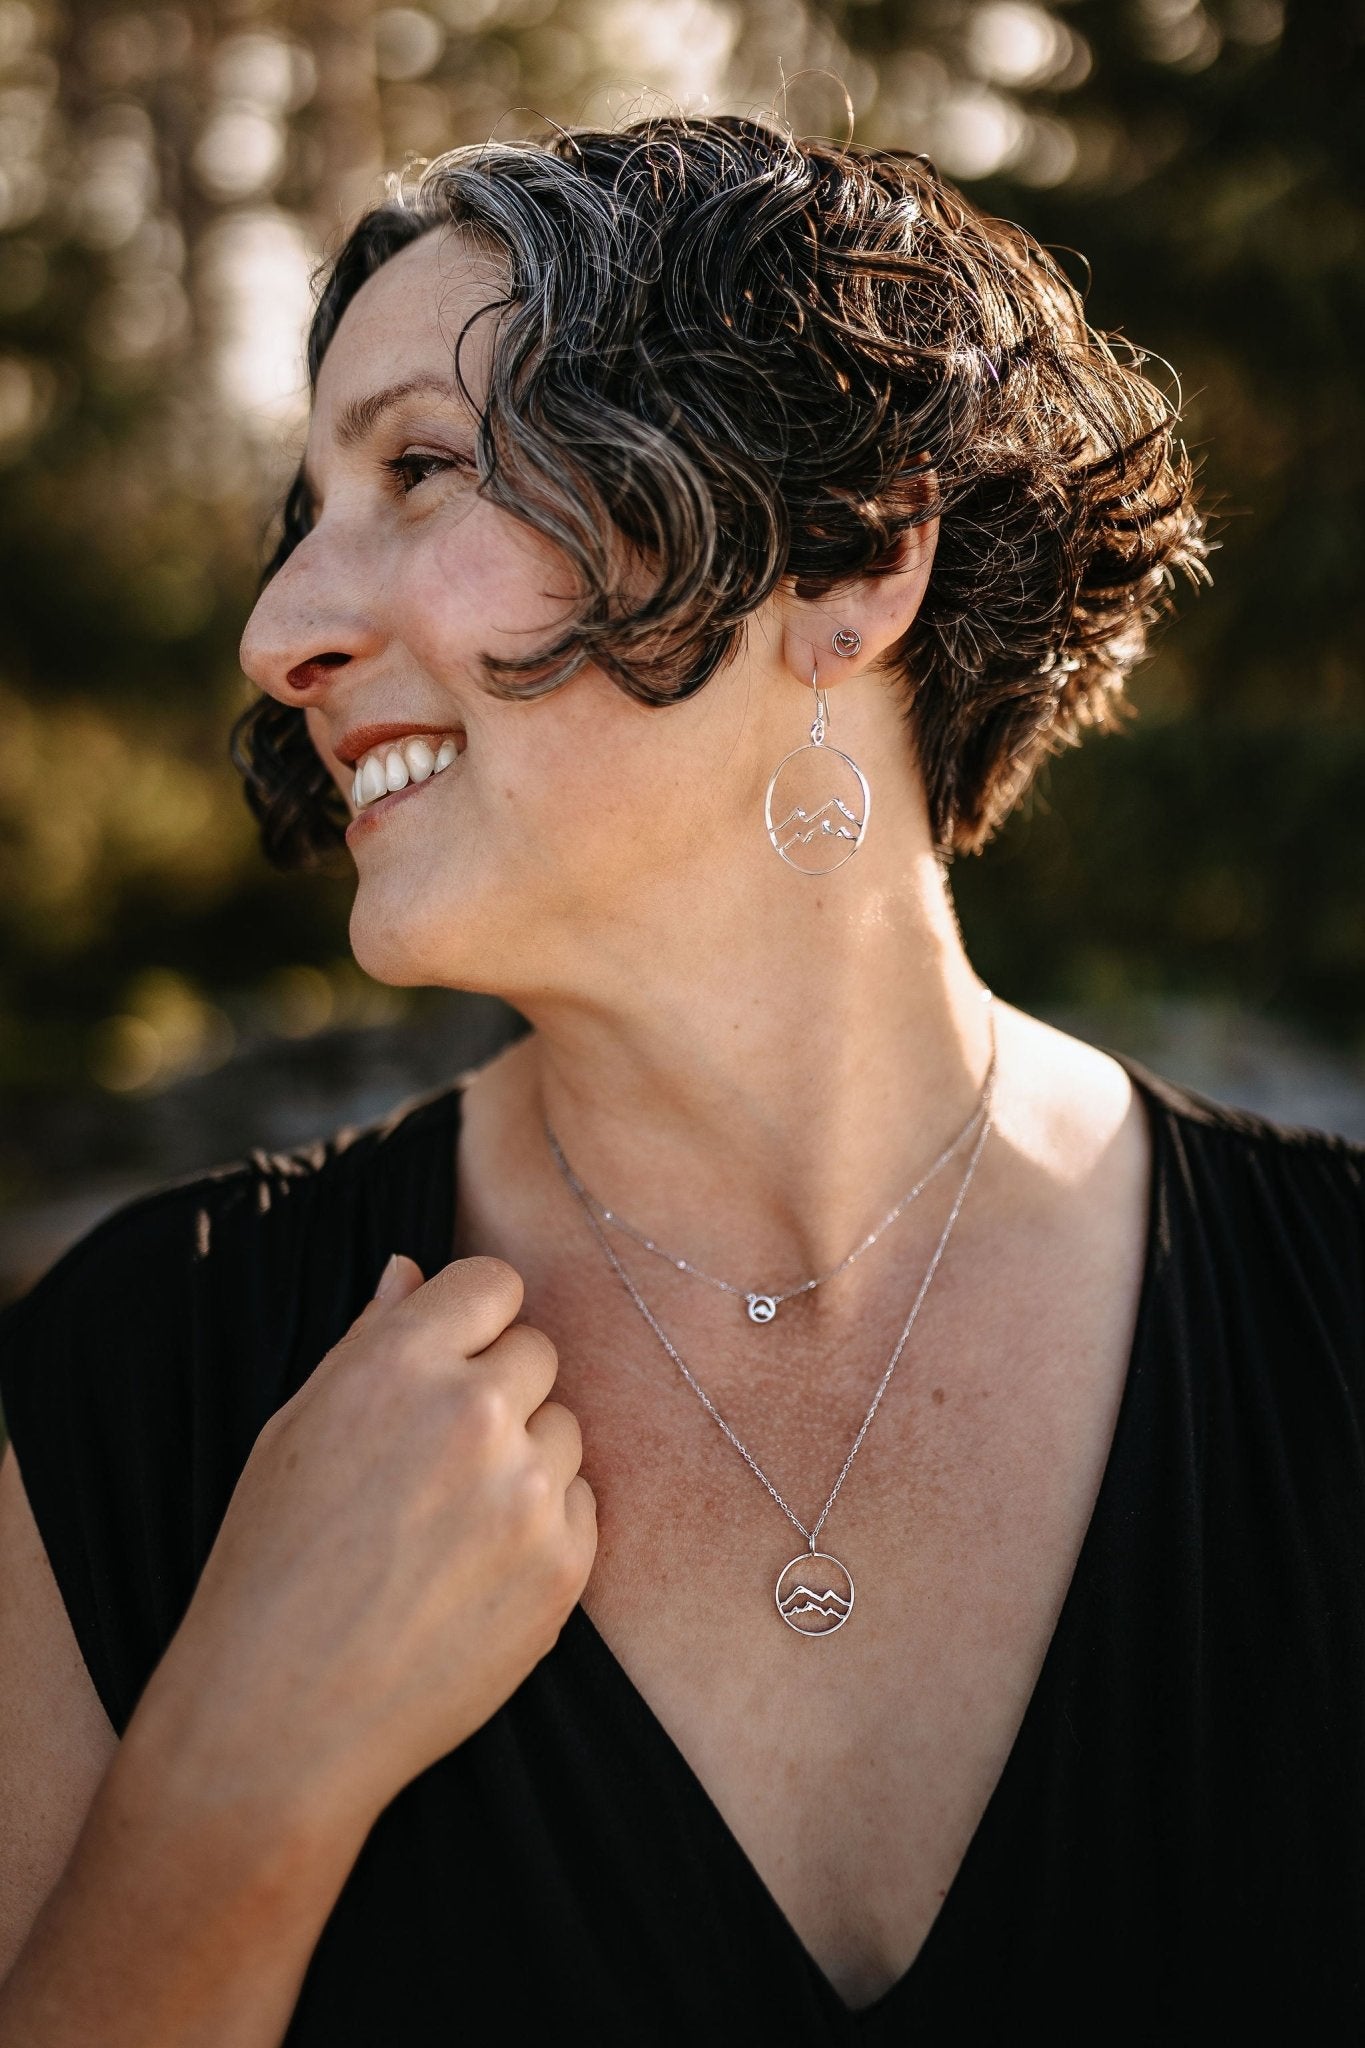 model wearing sterling silver coast mountain jewelry set with mountain circle earrings and layered silver mountain necklaces